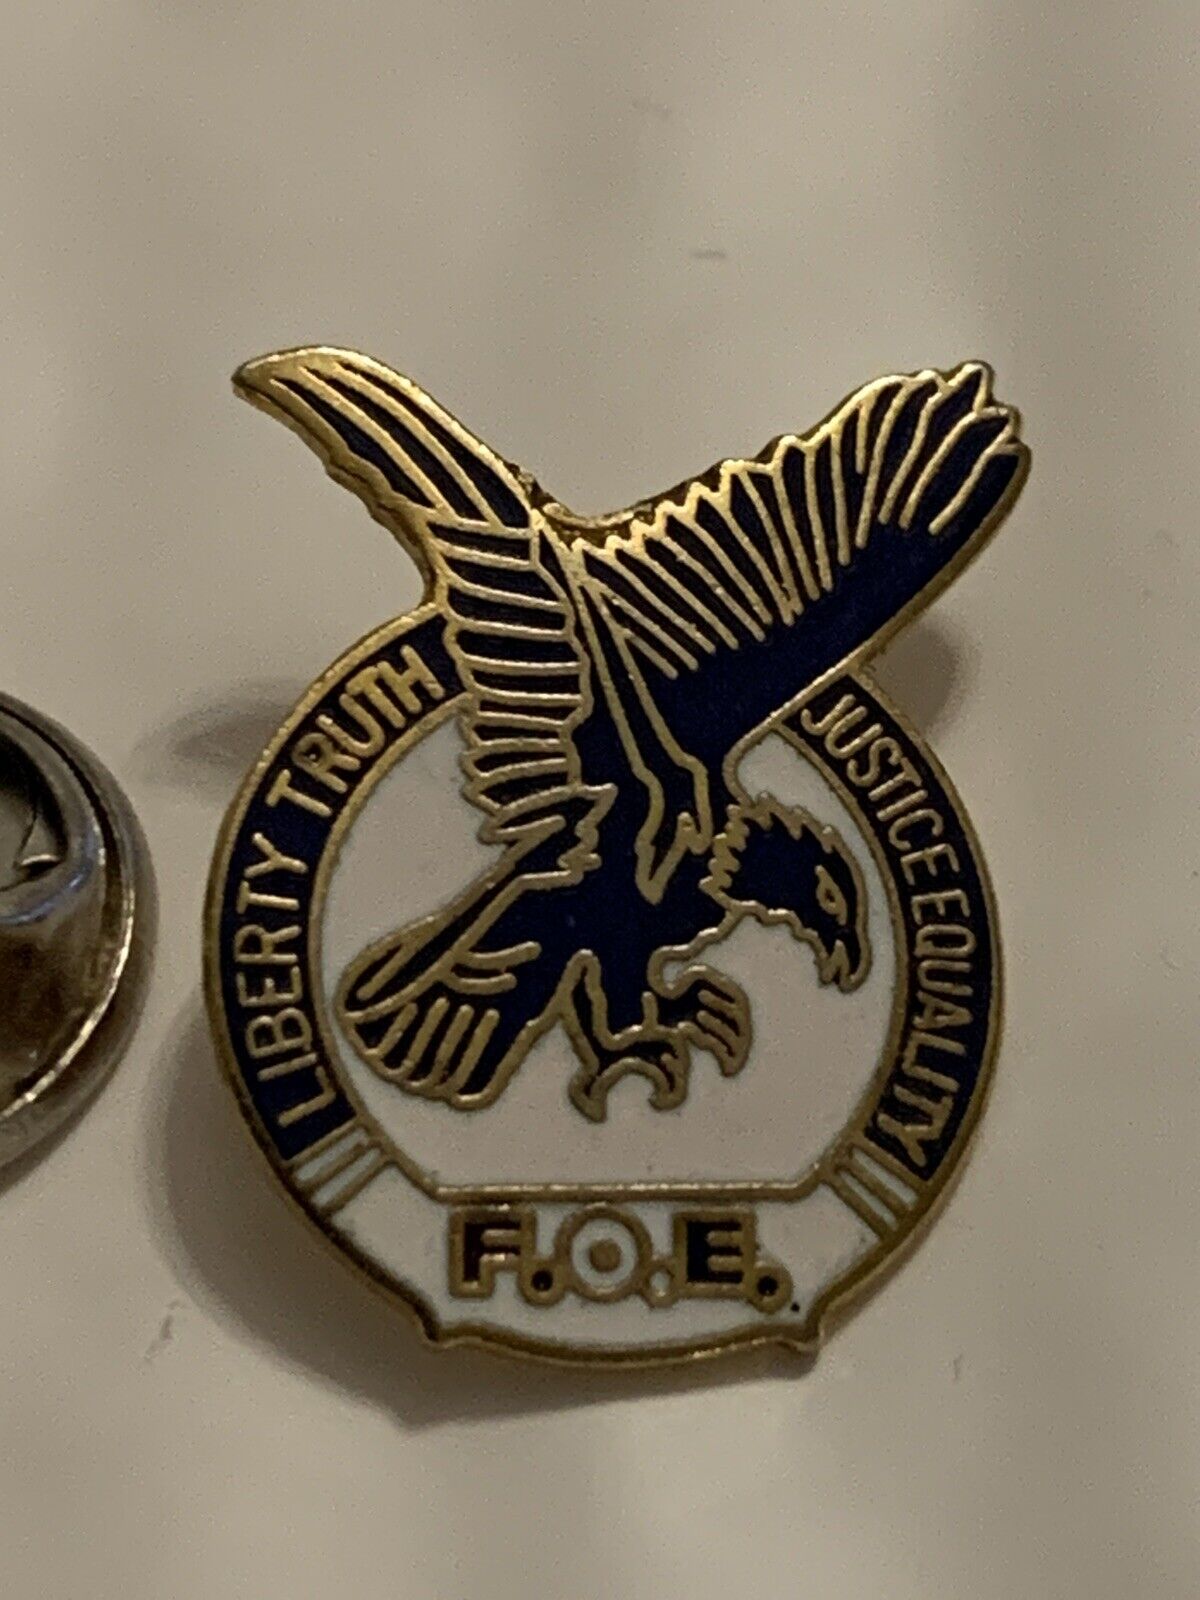 Small Vintage Fraternal Order of Eagles Liberty Truth Justice Equality Lapel Pin